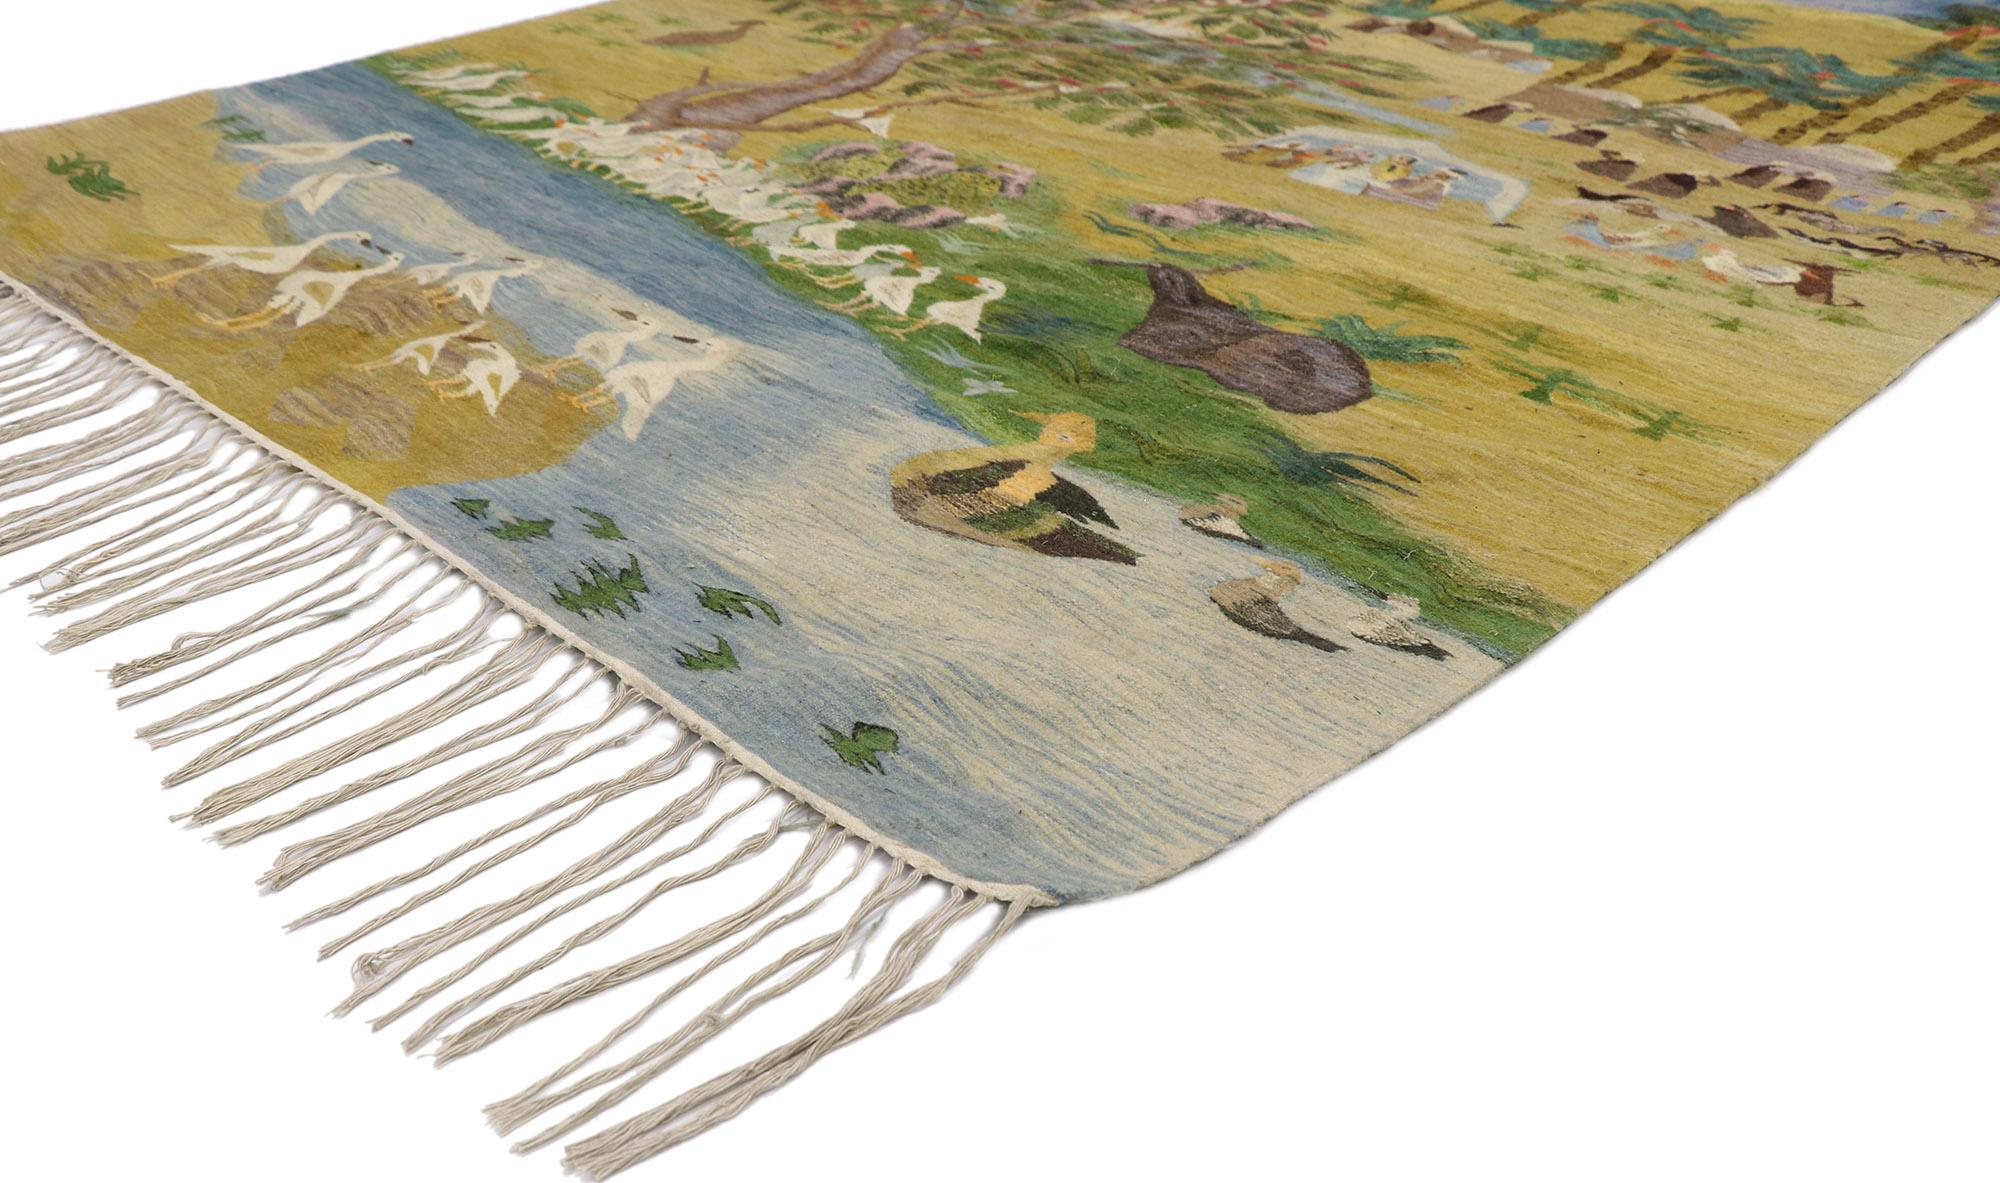 ?78103 Vintage Egyptian Ramses Wissa Wassef Tapestry 06'03 x 07'08. ??Reminiscences of an exotic journey and folk art charm, this Egyptian wool tapestry is a captivating vision of woven beauty. The weaver's signature woven into the bottom left